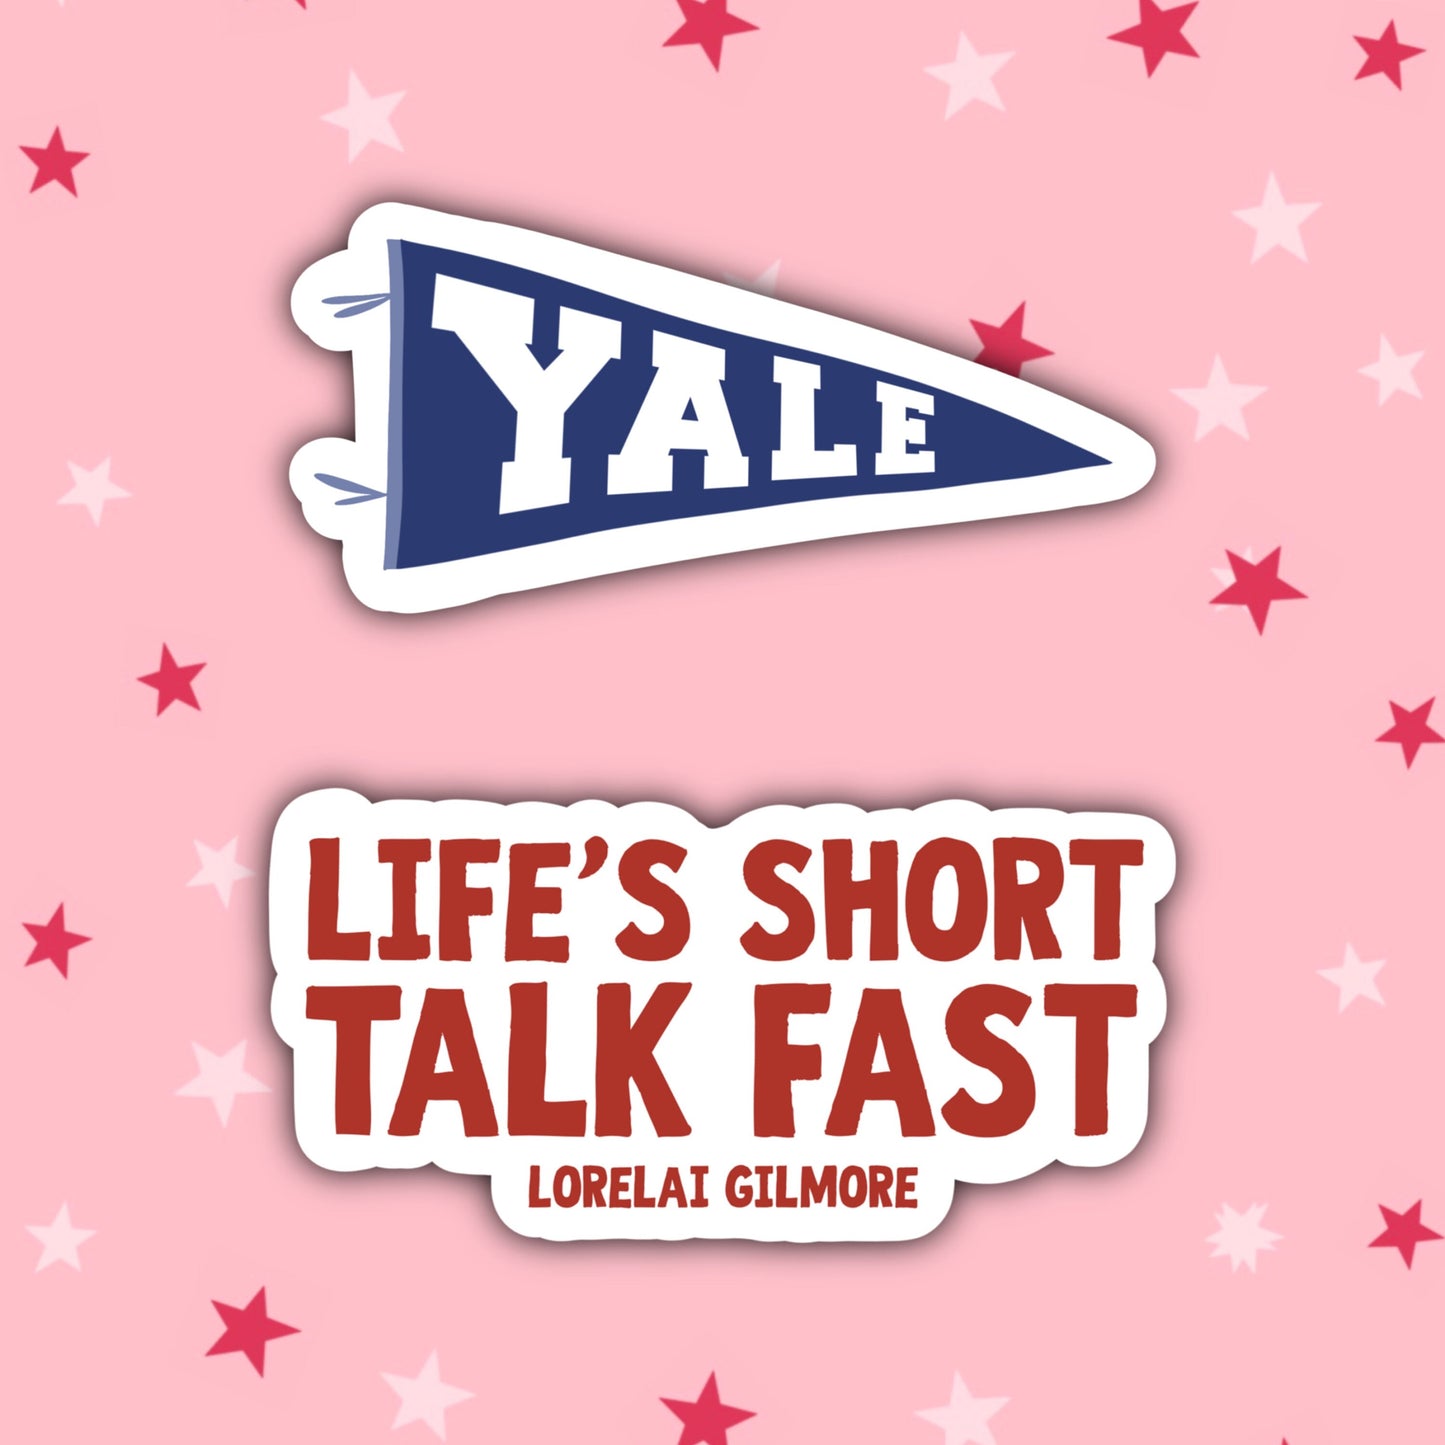 Yale Flag | Rory Gilmore | Gilmore Girls Sticker